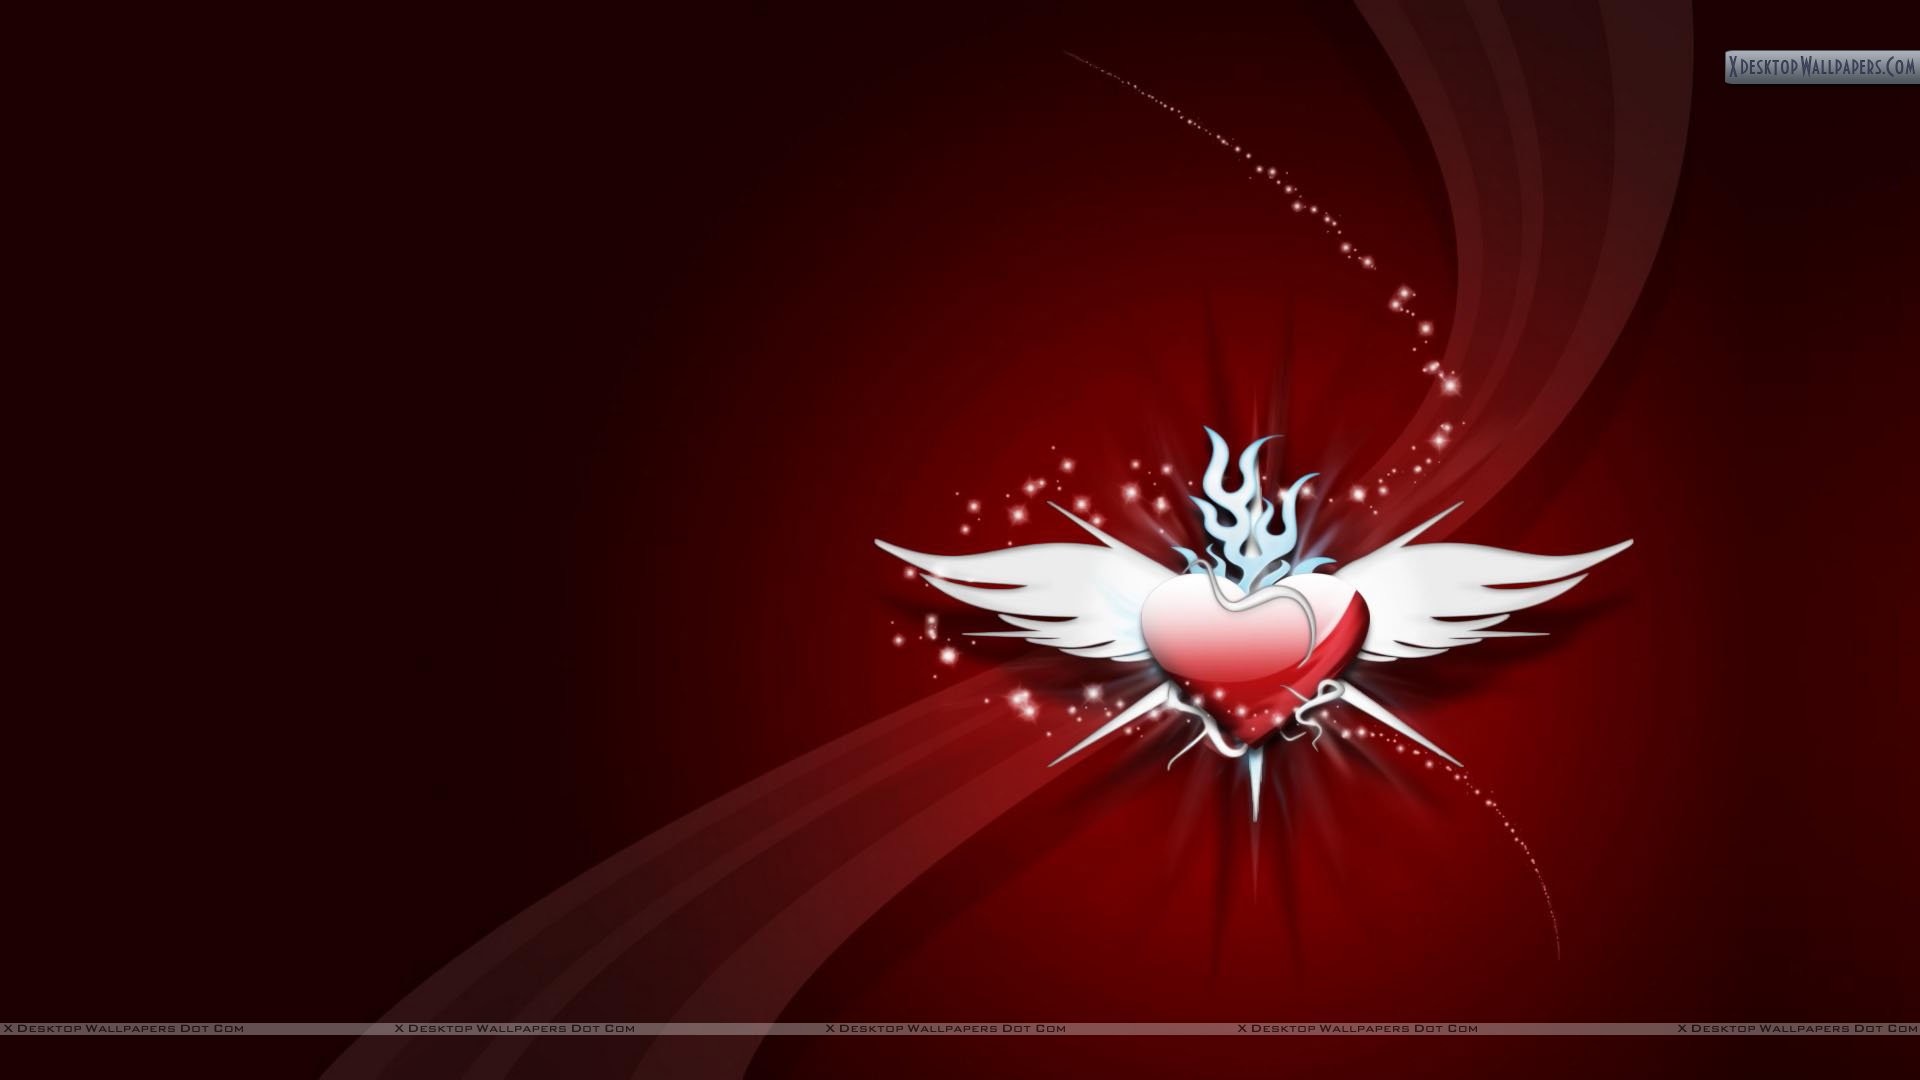 1920x1080 You are viewing wallpaper titled "Red Heart With White Wings ...